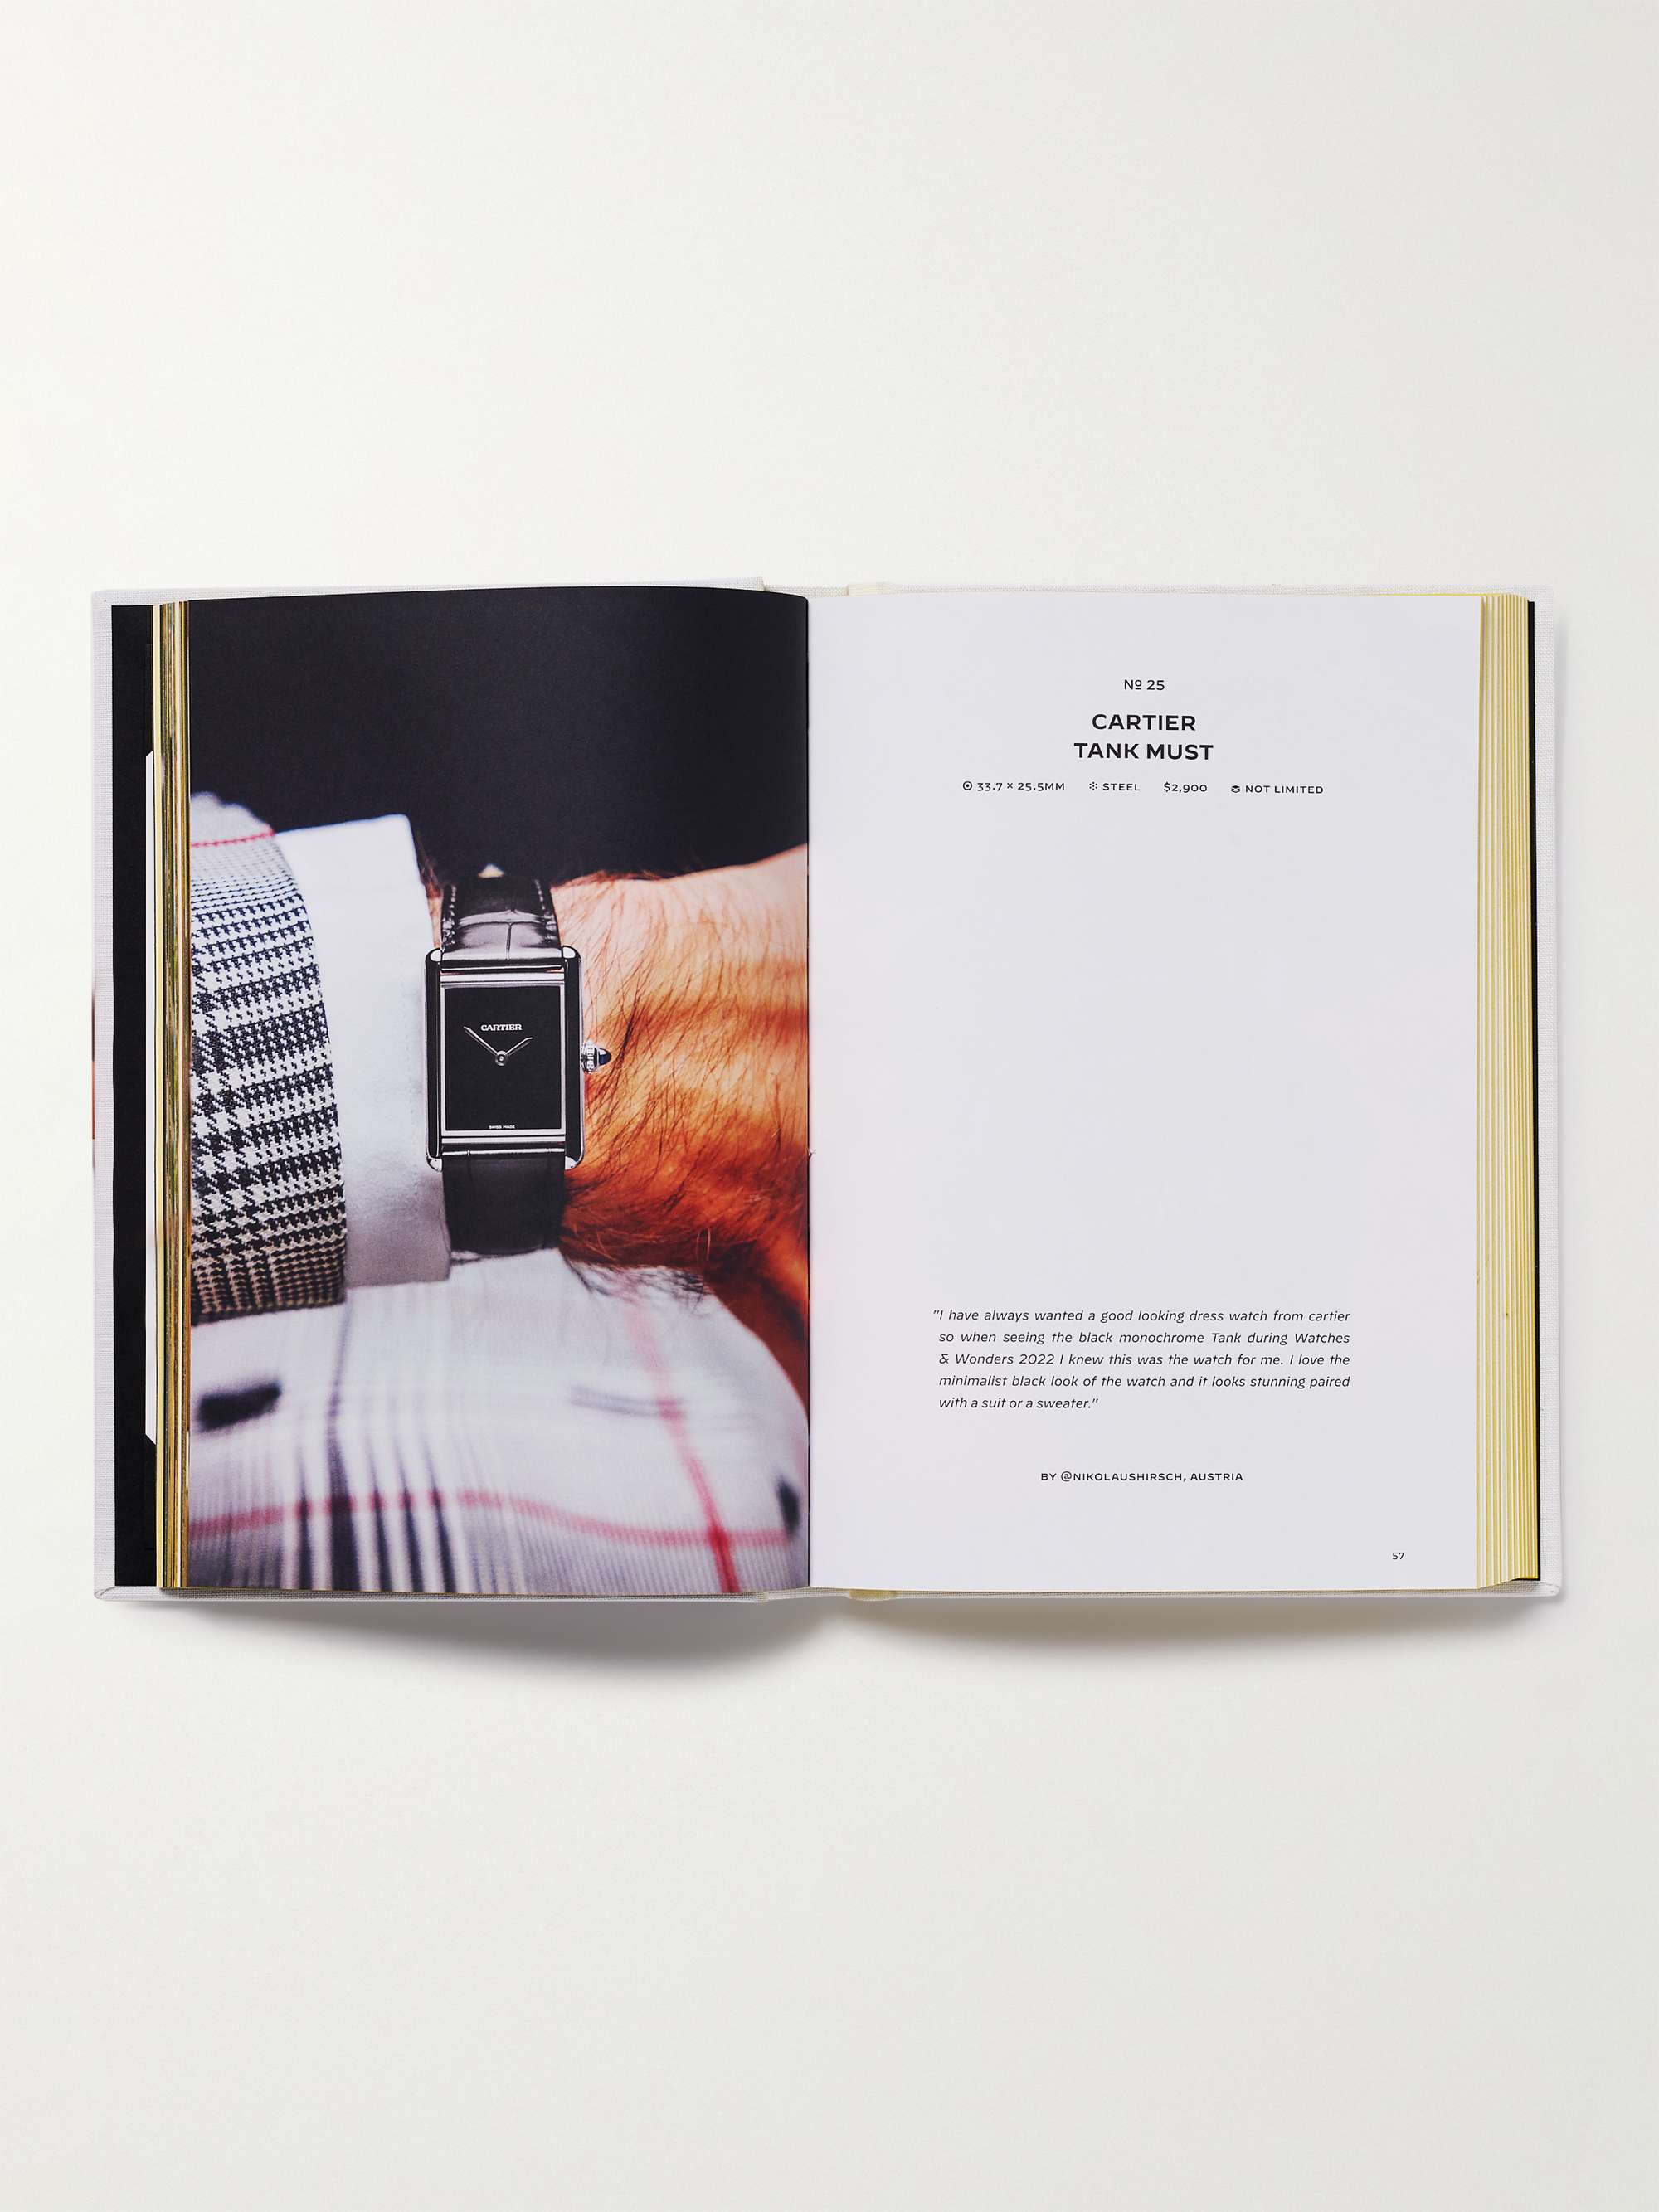 THE WATCH ANNUAL The Watch Annual 2022 Exclusive MR PORTER Edition Hardcover Book